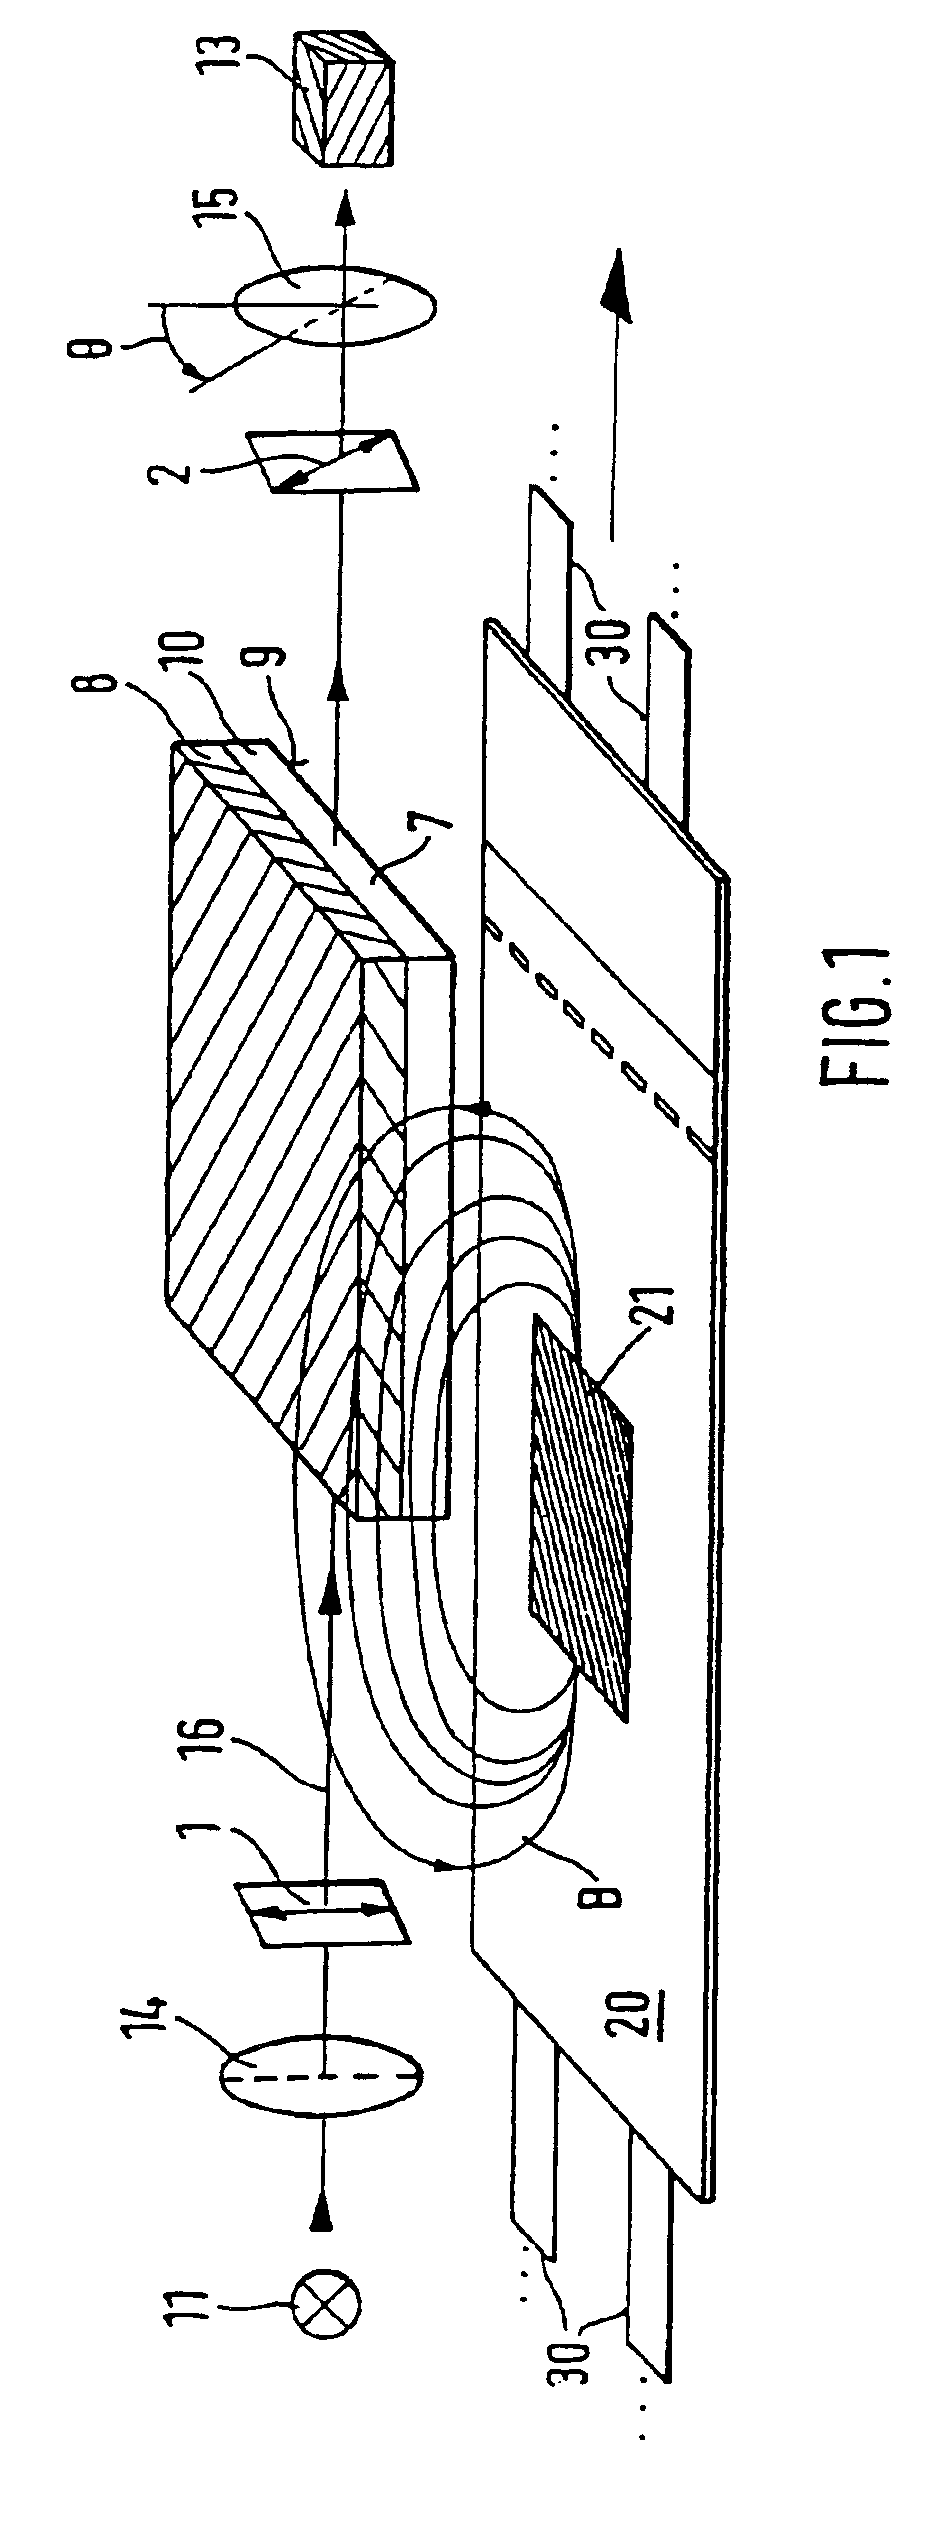 Apparatus for examining properties of objects